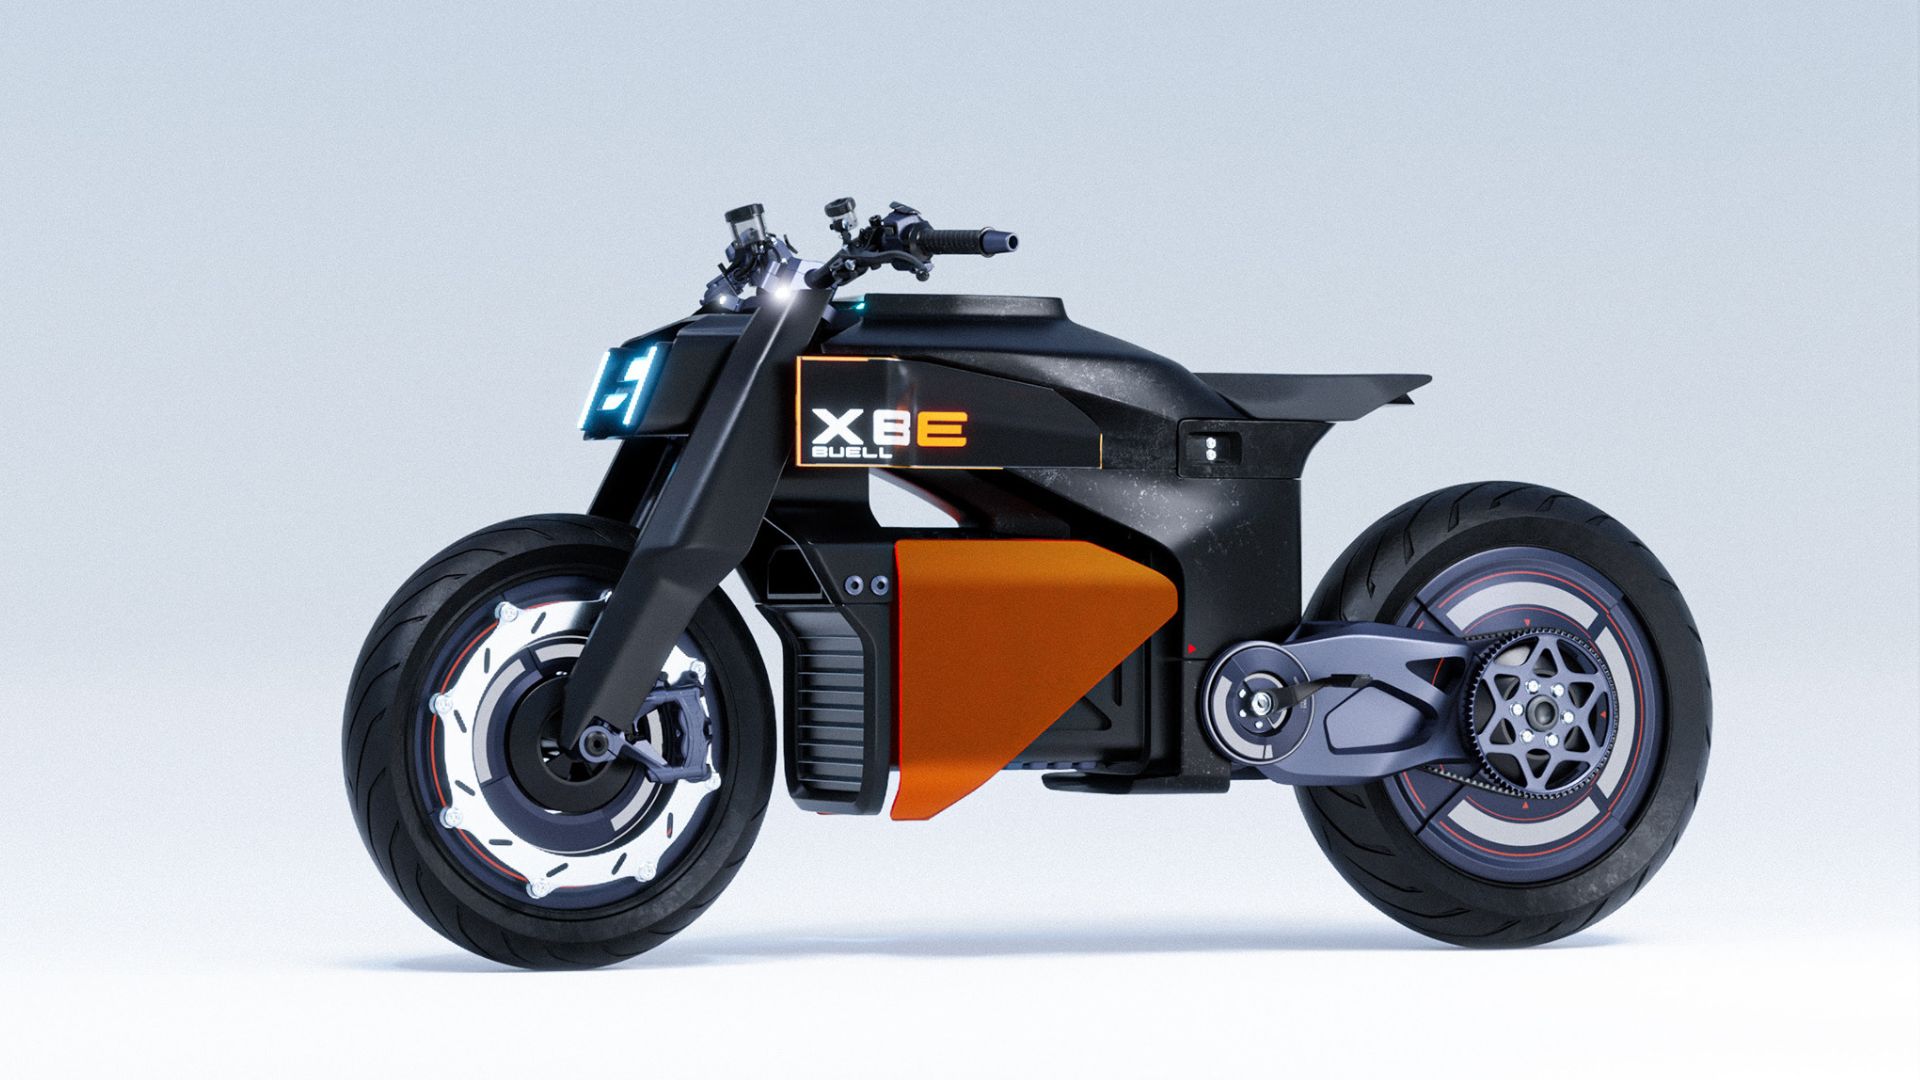 To Buell XBE Concept δεν ξεχνά τις ρίζες του!